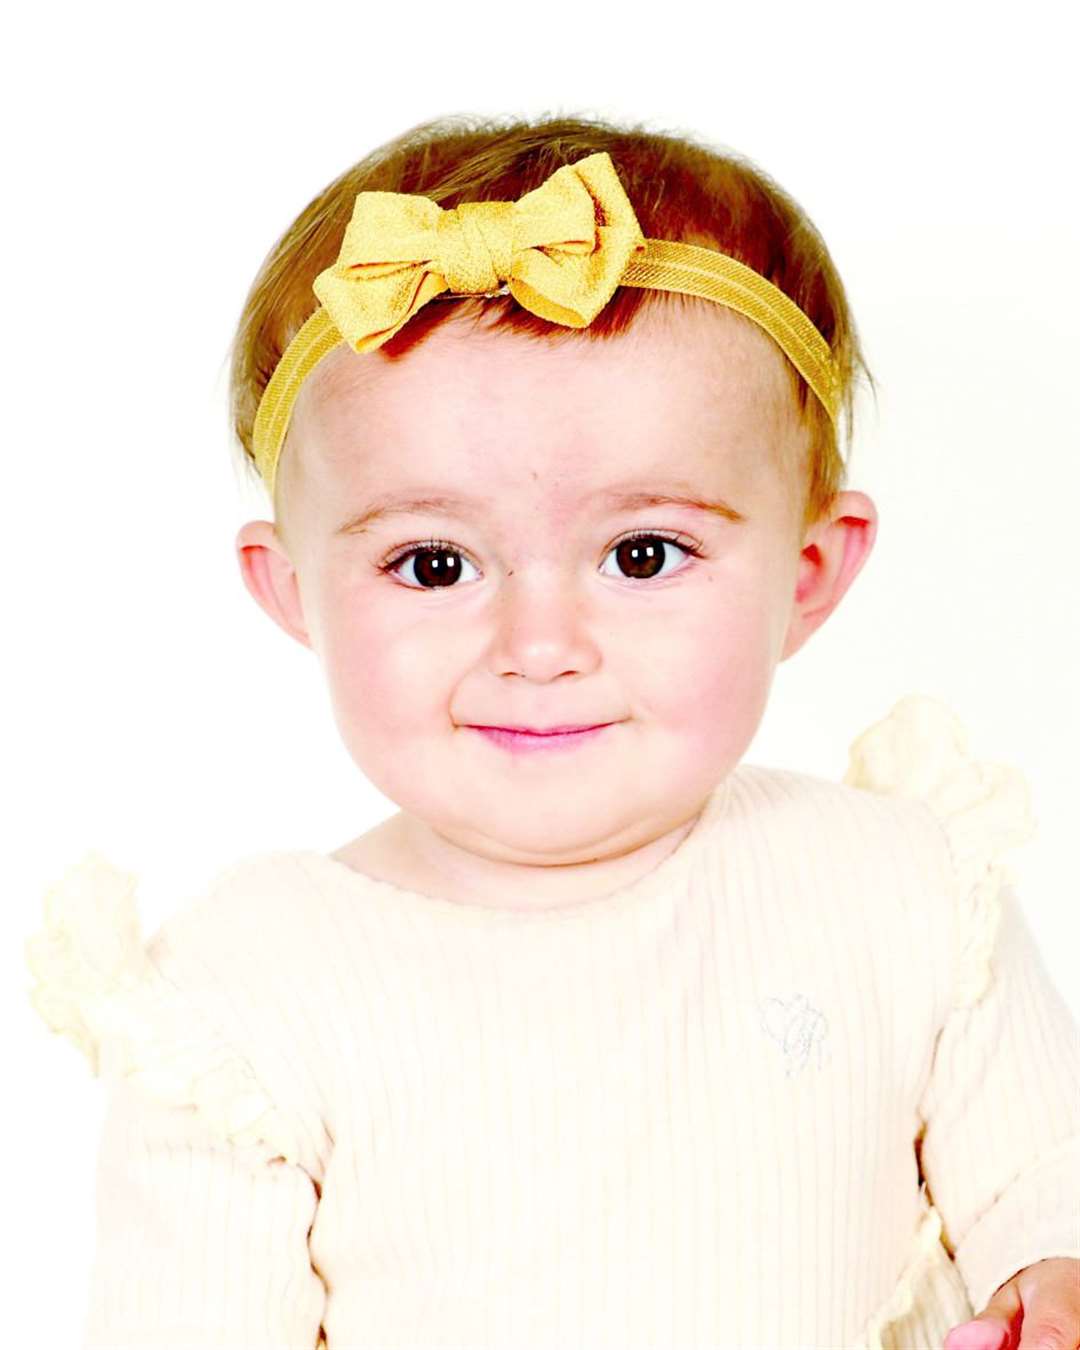 Violet-Marie Pearce came third in the Cute Kids' contest